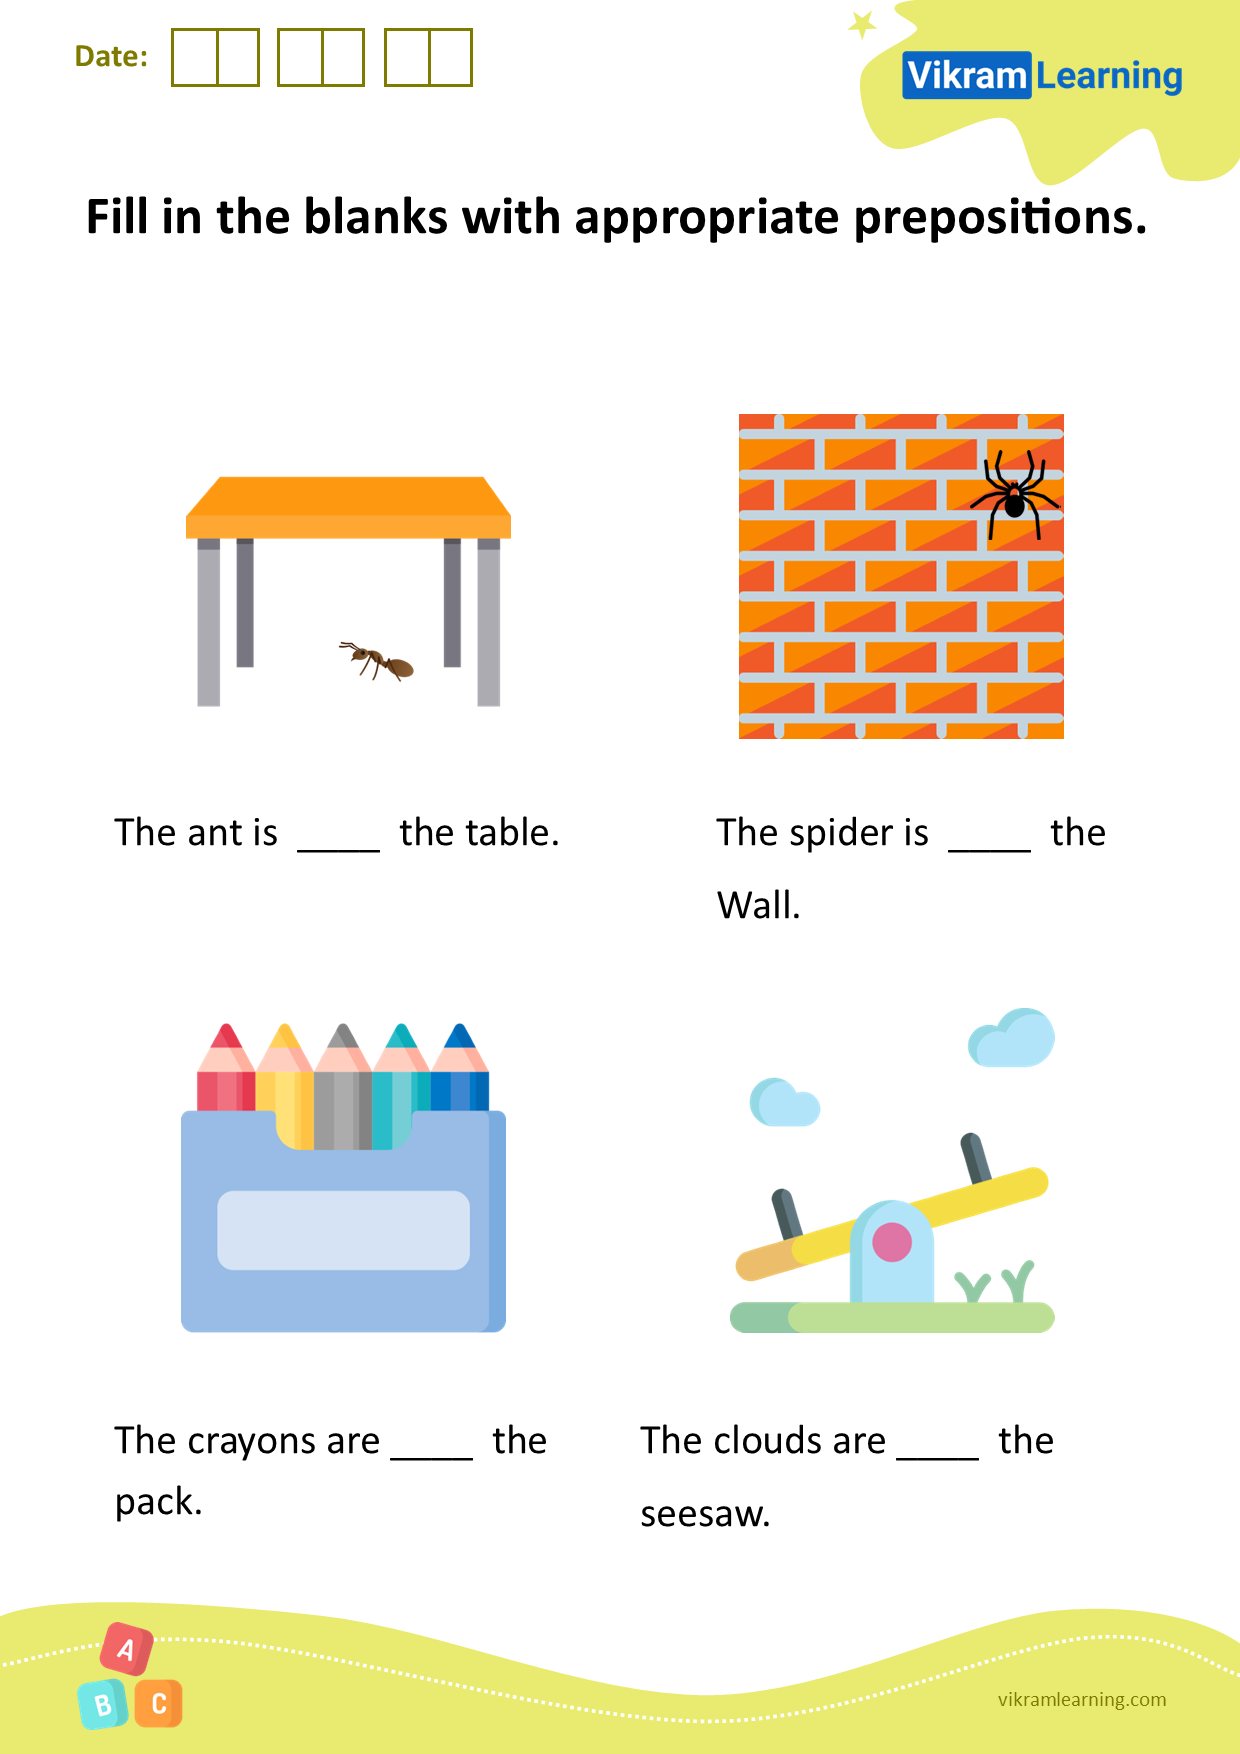 download-fill-in-the-blanks-with-appropriate-prepositions-worksheets-vikramlearning